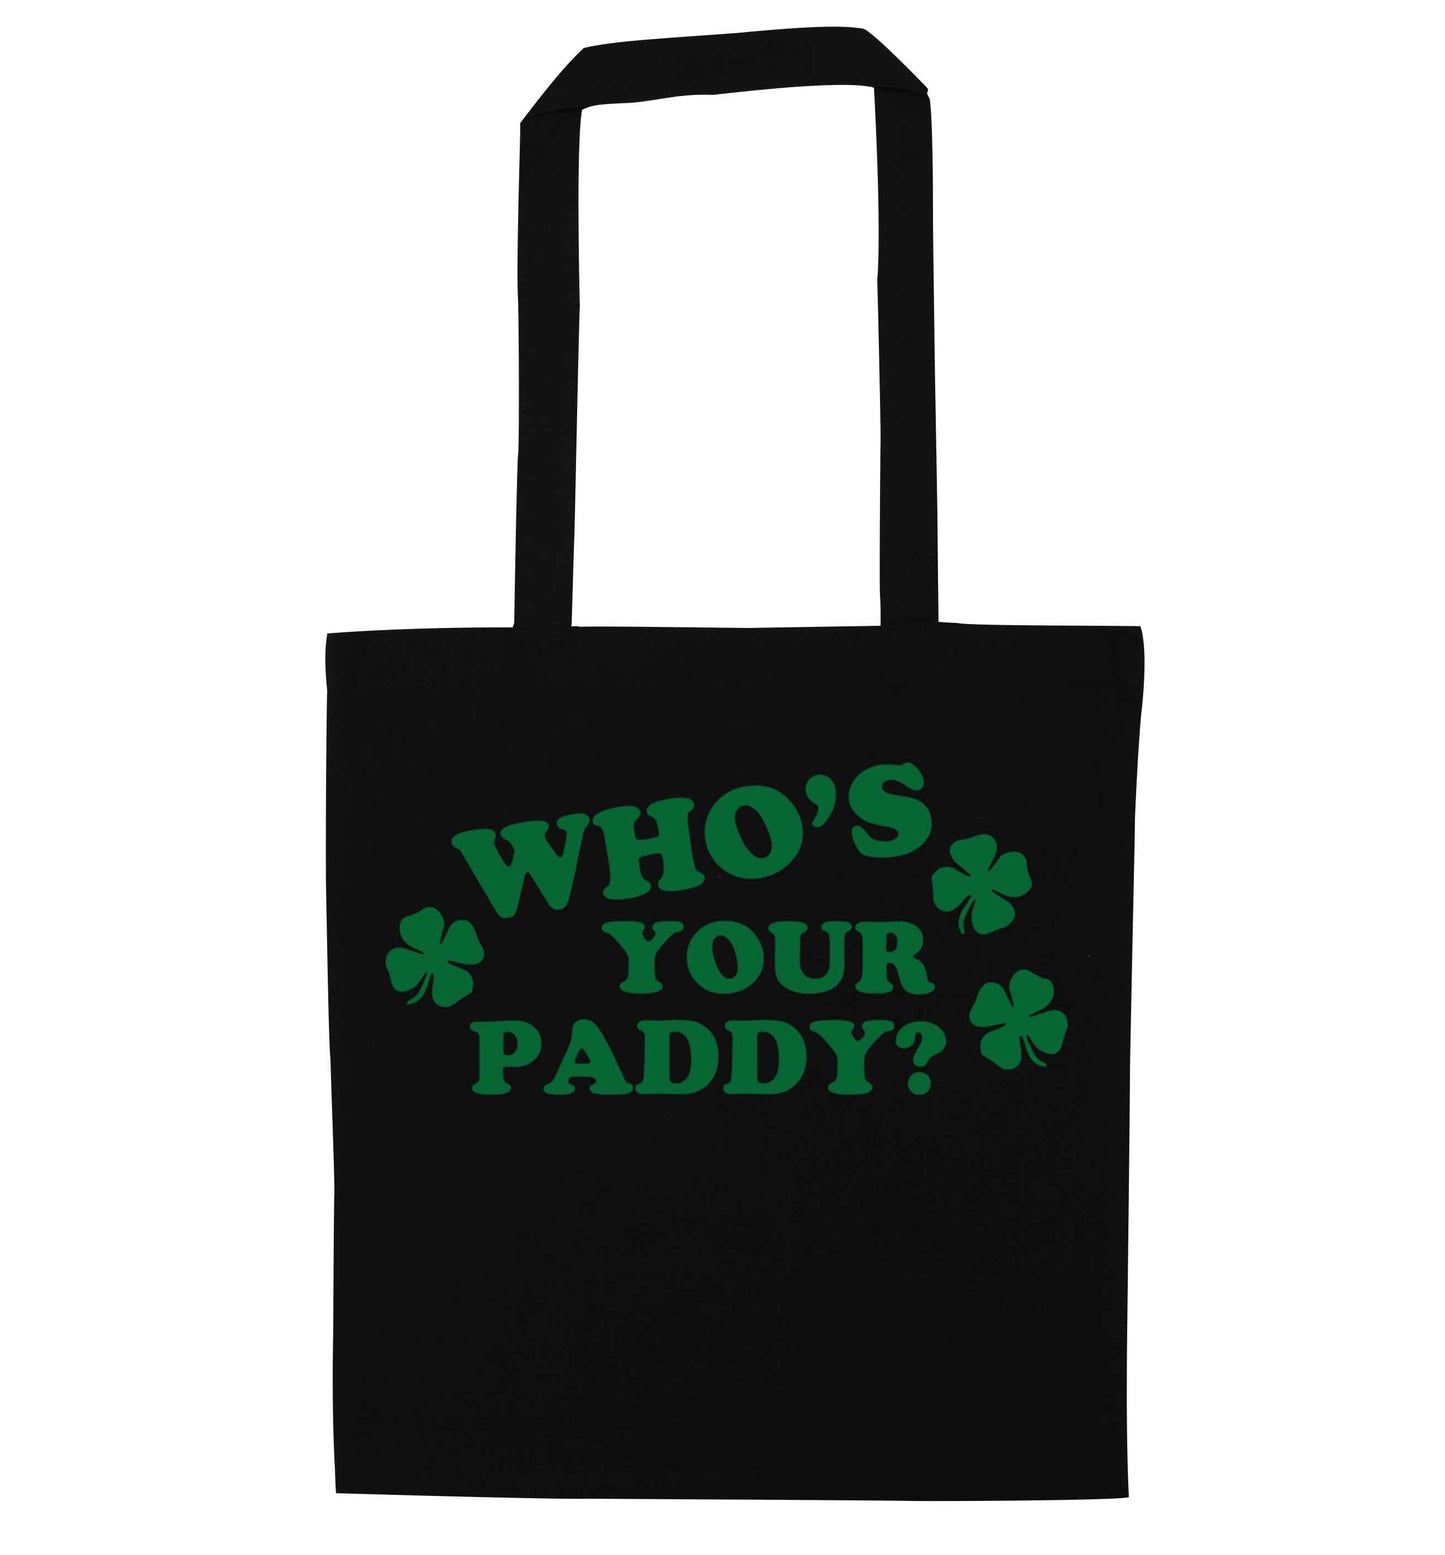 Who's your paddy? black tote bag